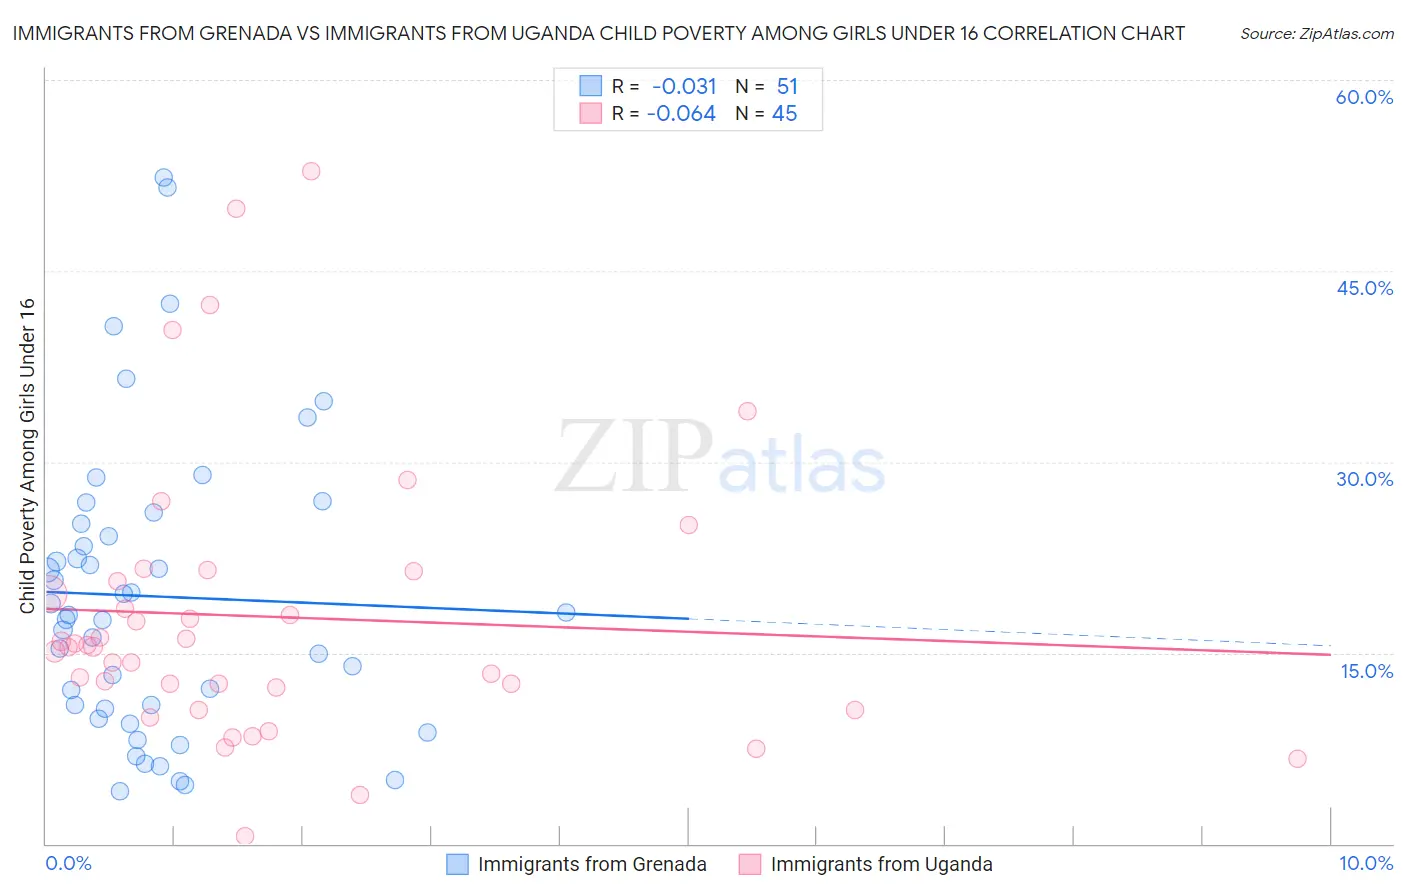 Immigrants from Grenada vs Immigrants from Uganda Child Poverty Among Girls Under 16